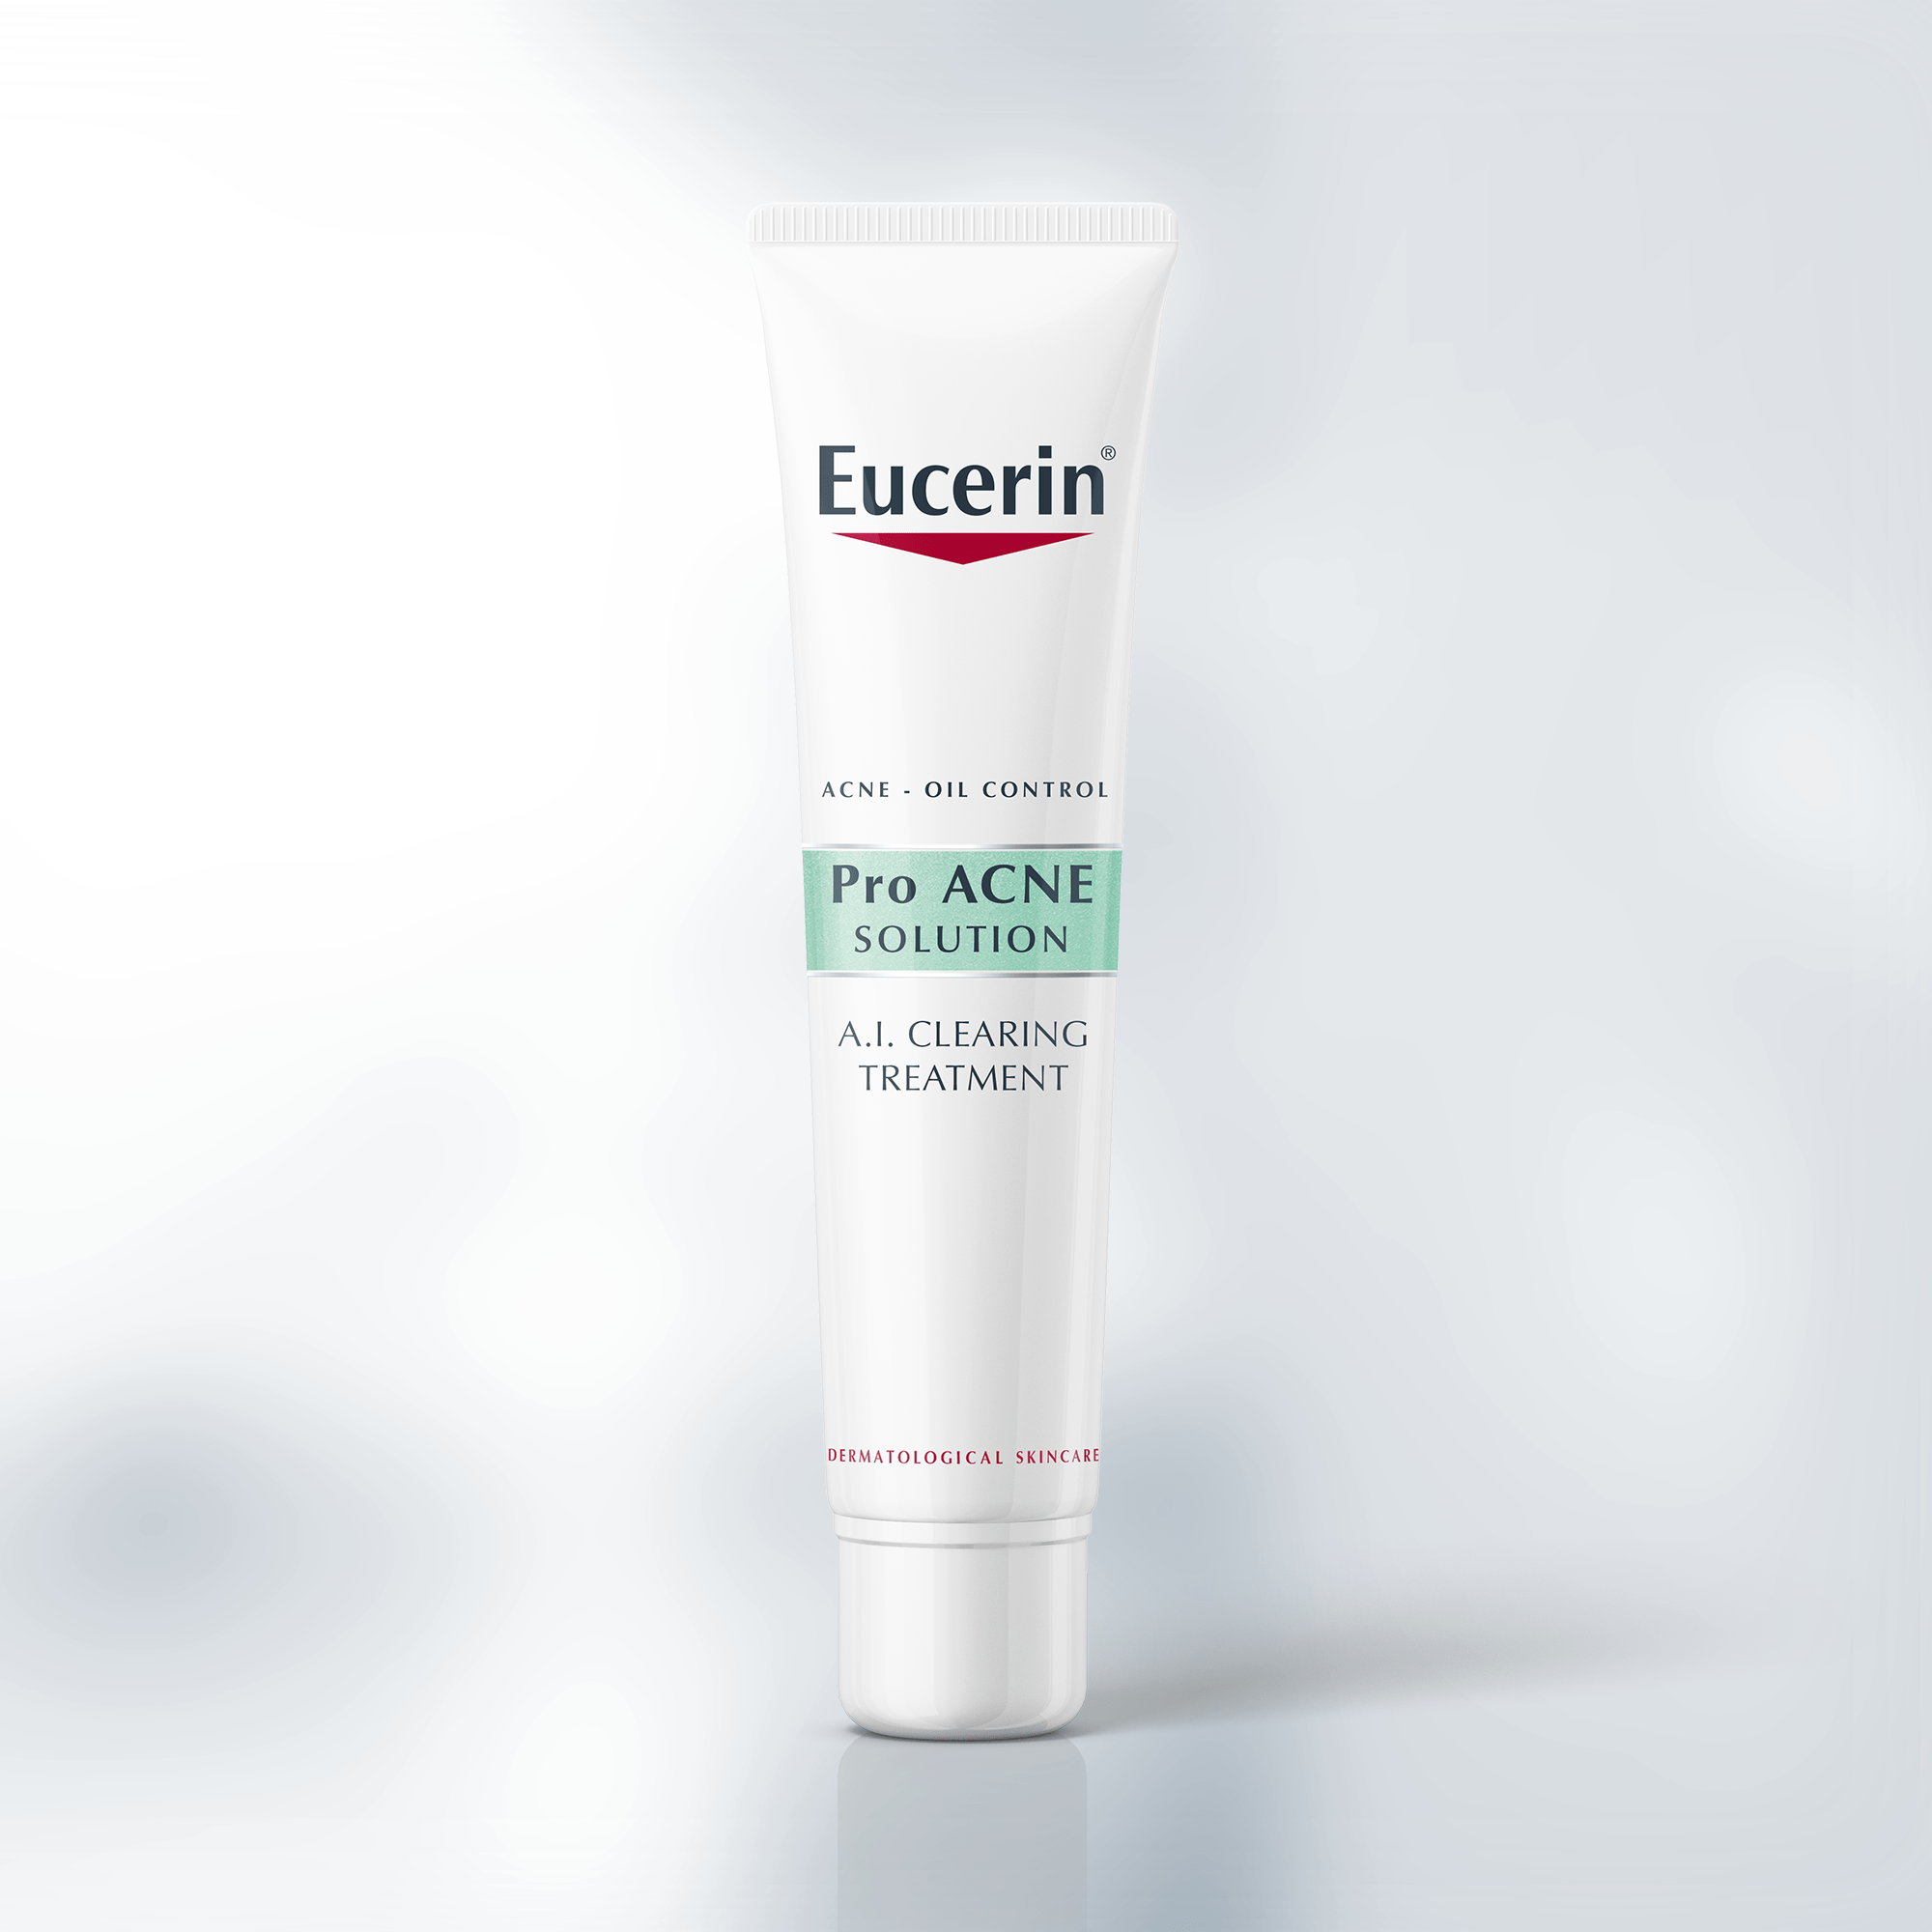 Image from Eucerin (Provided to SAYS)